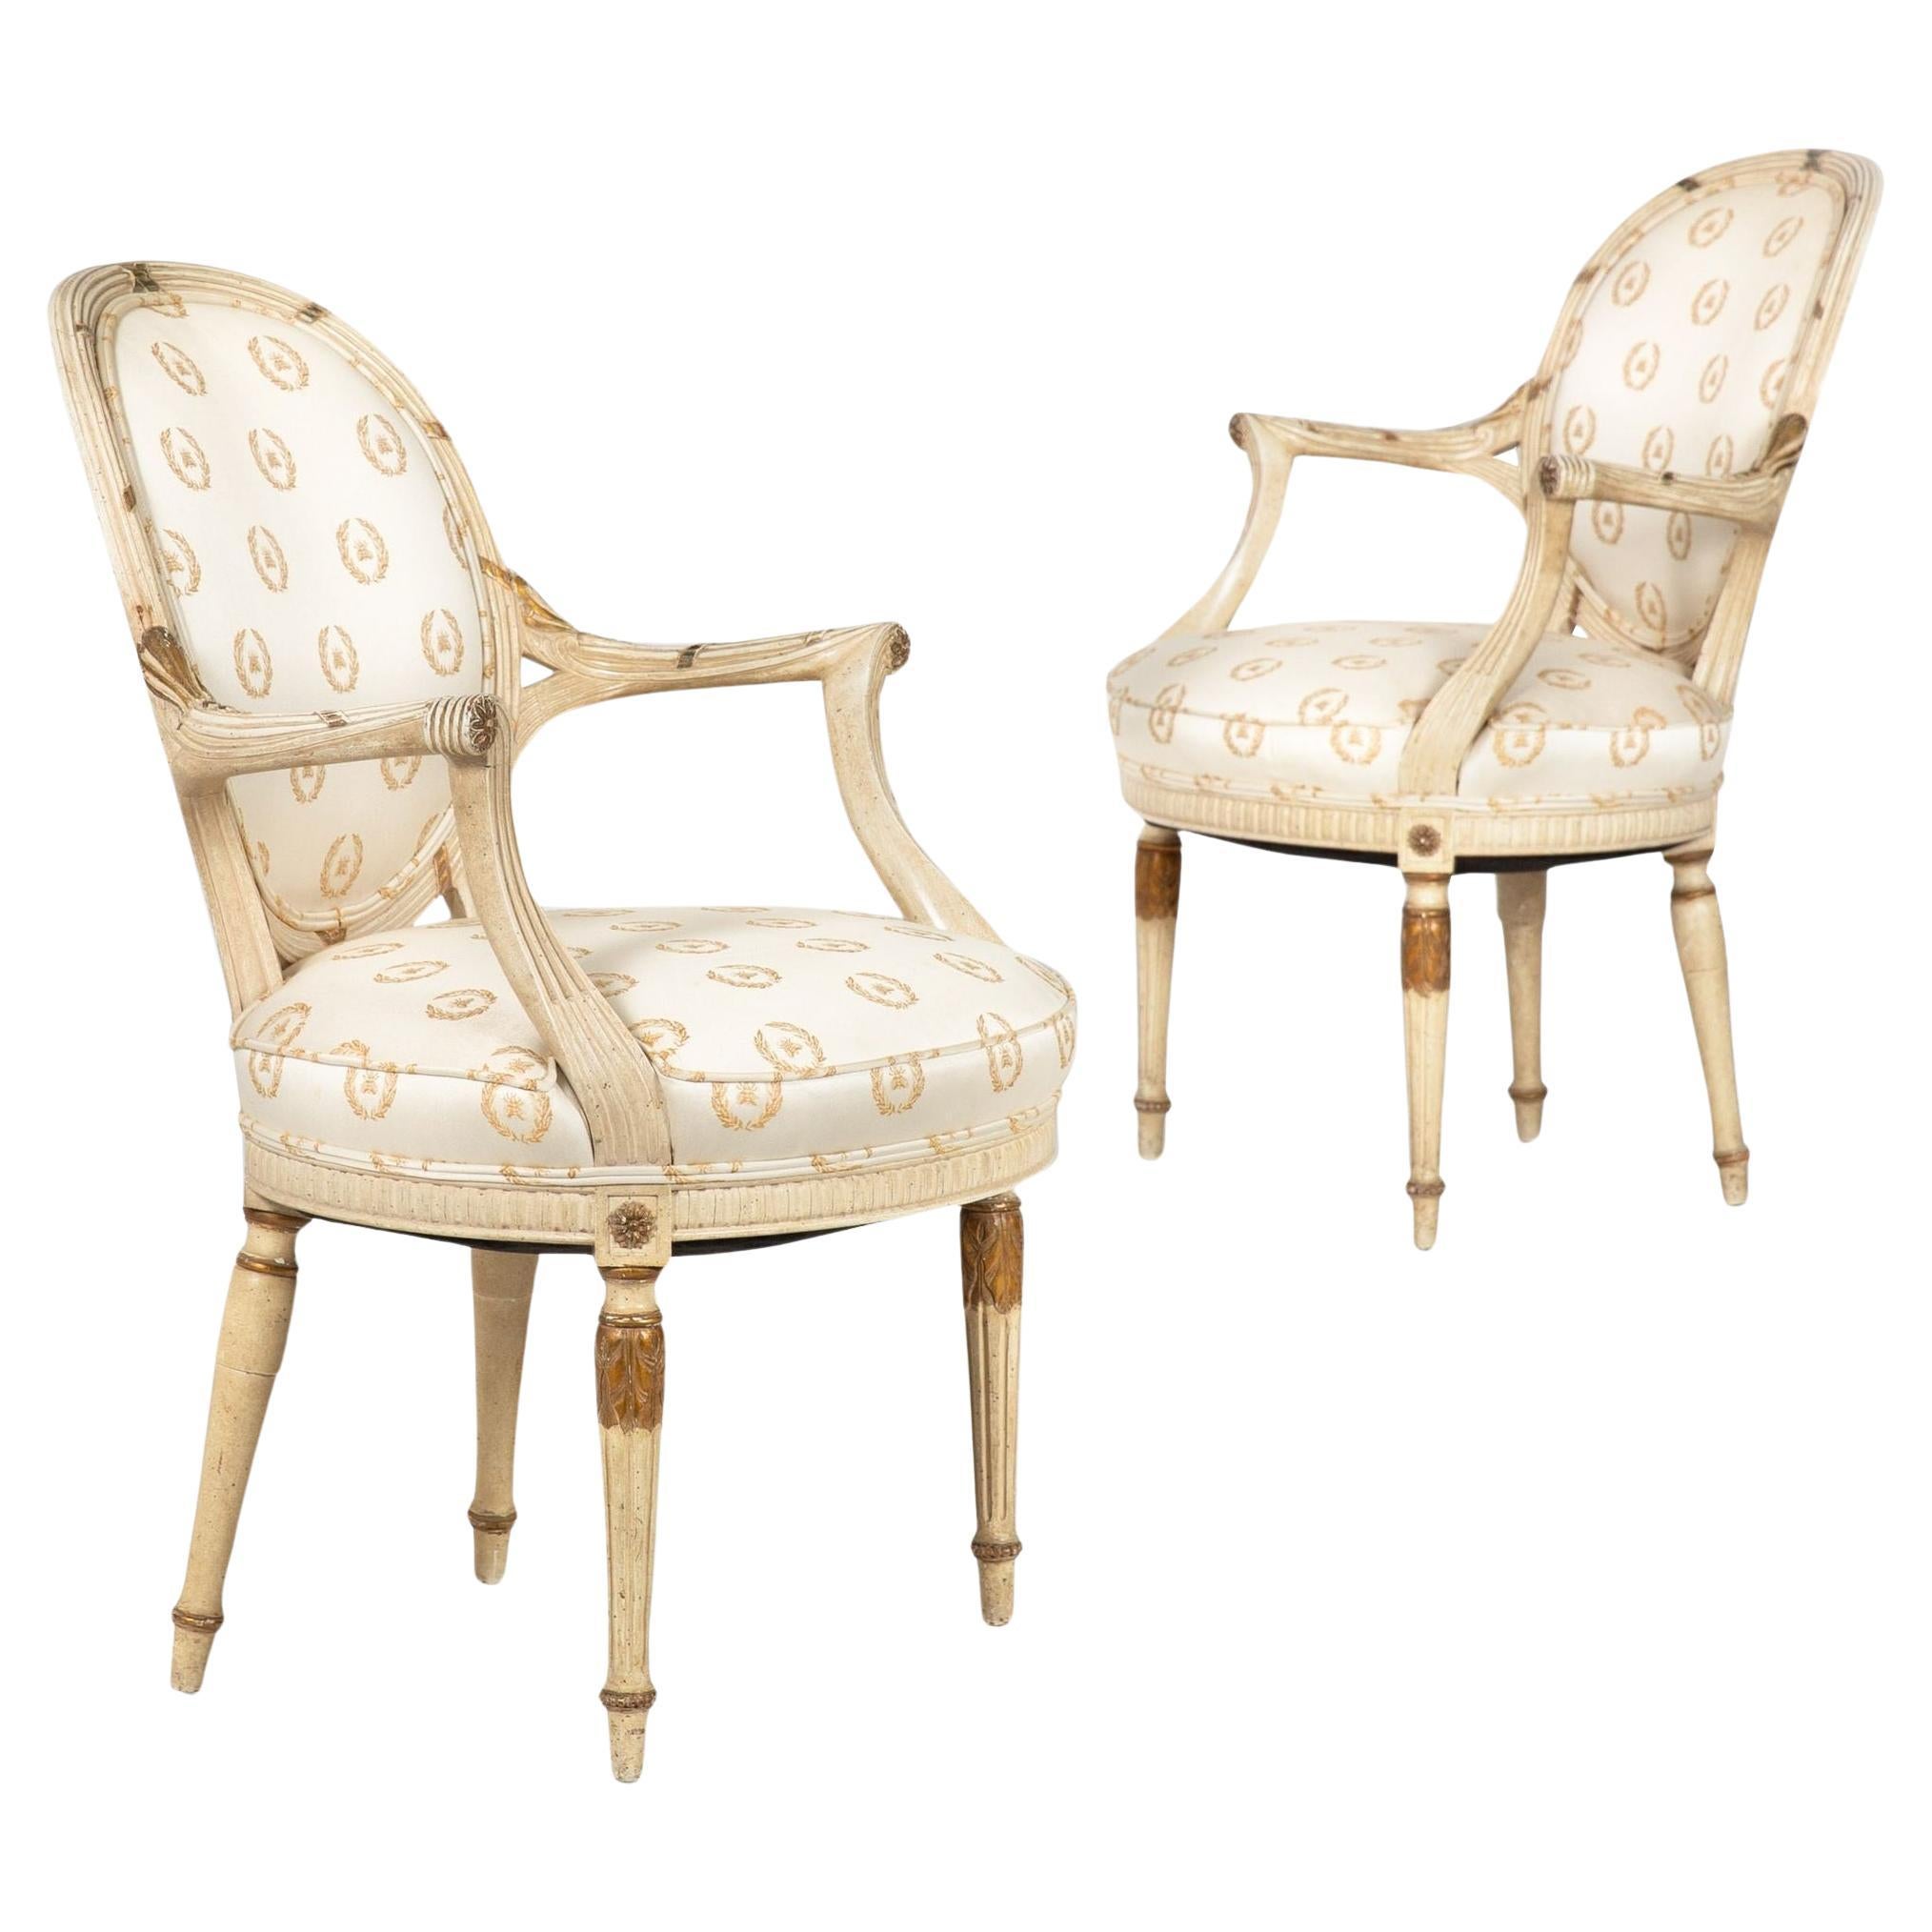 Pair of French Art Deco Lacquered White Arm Chairs circa 1940s